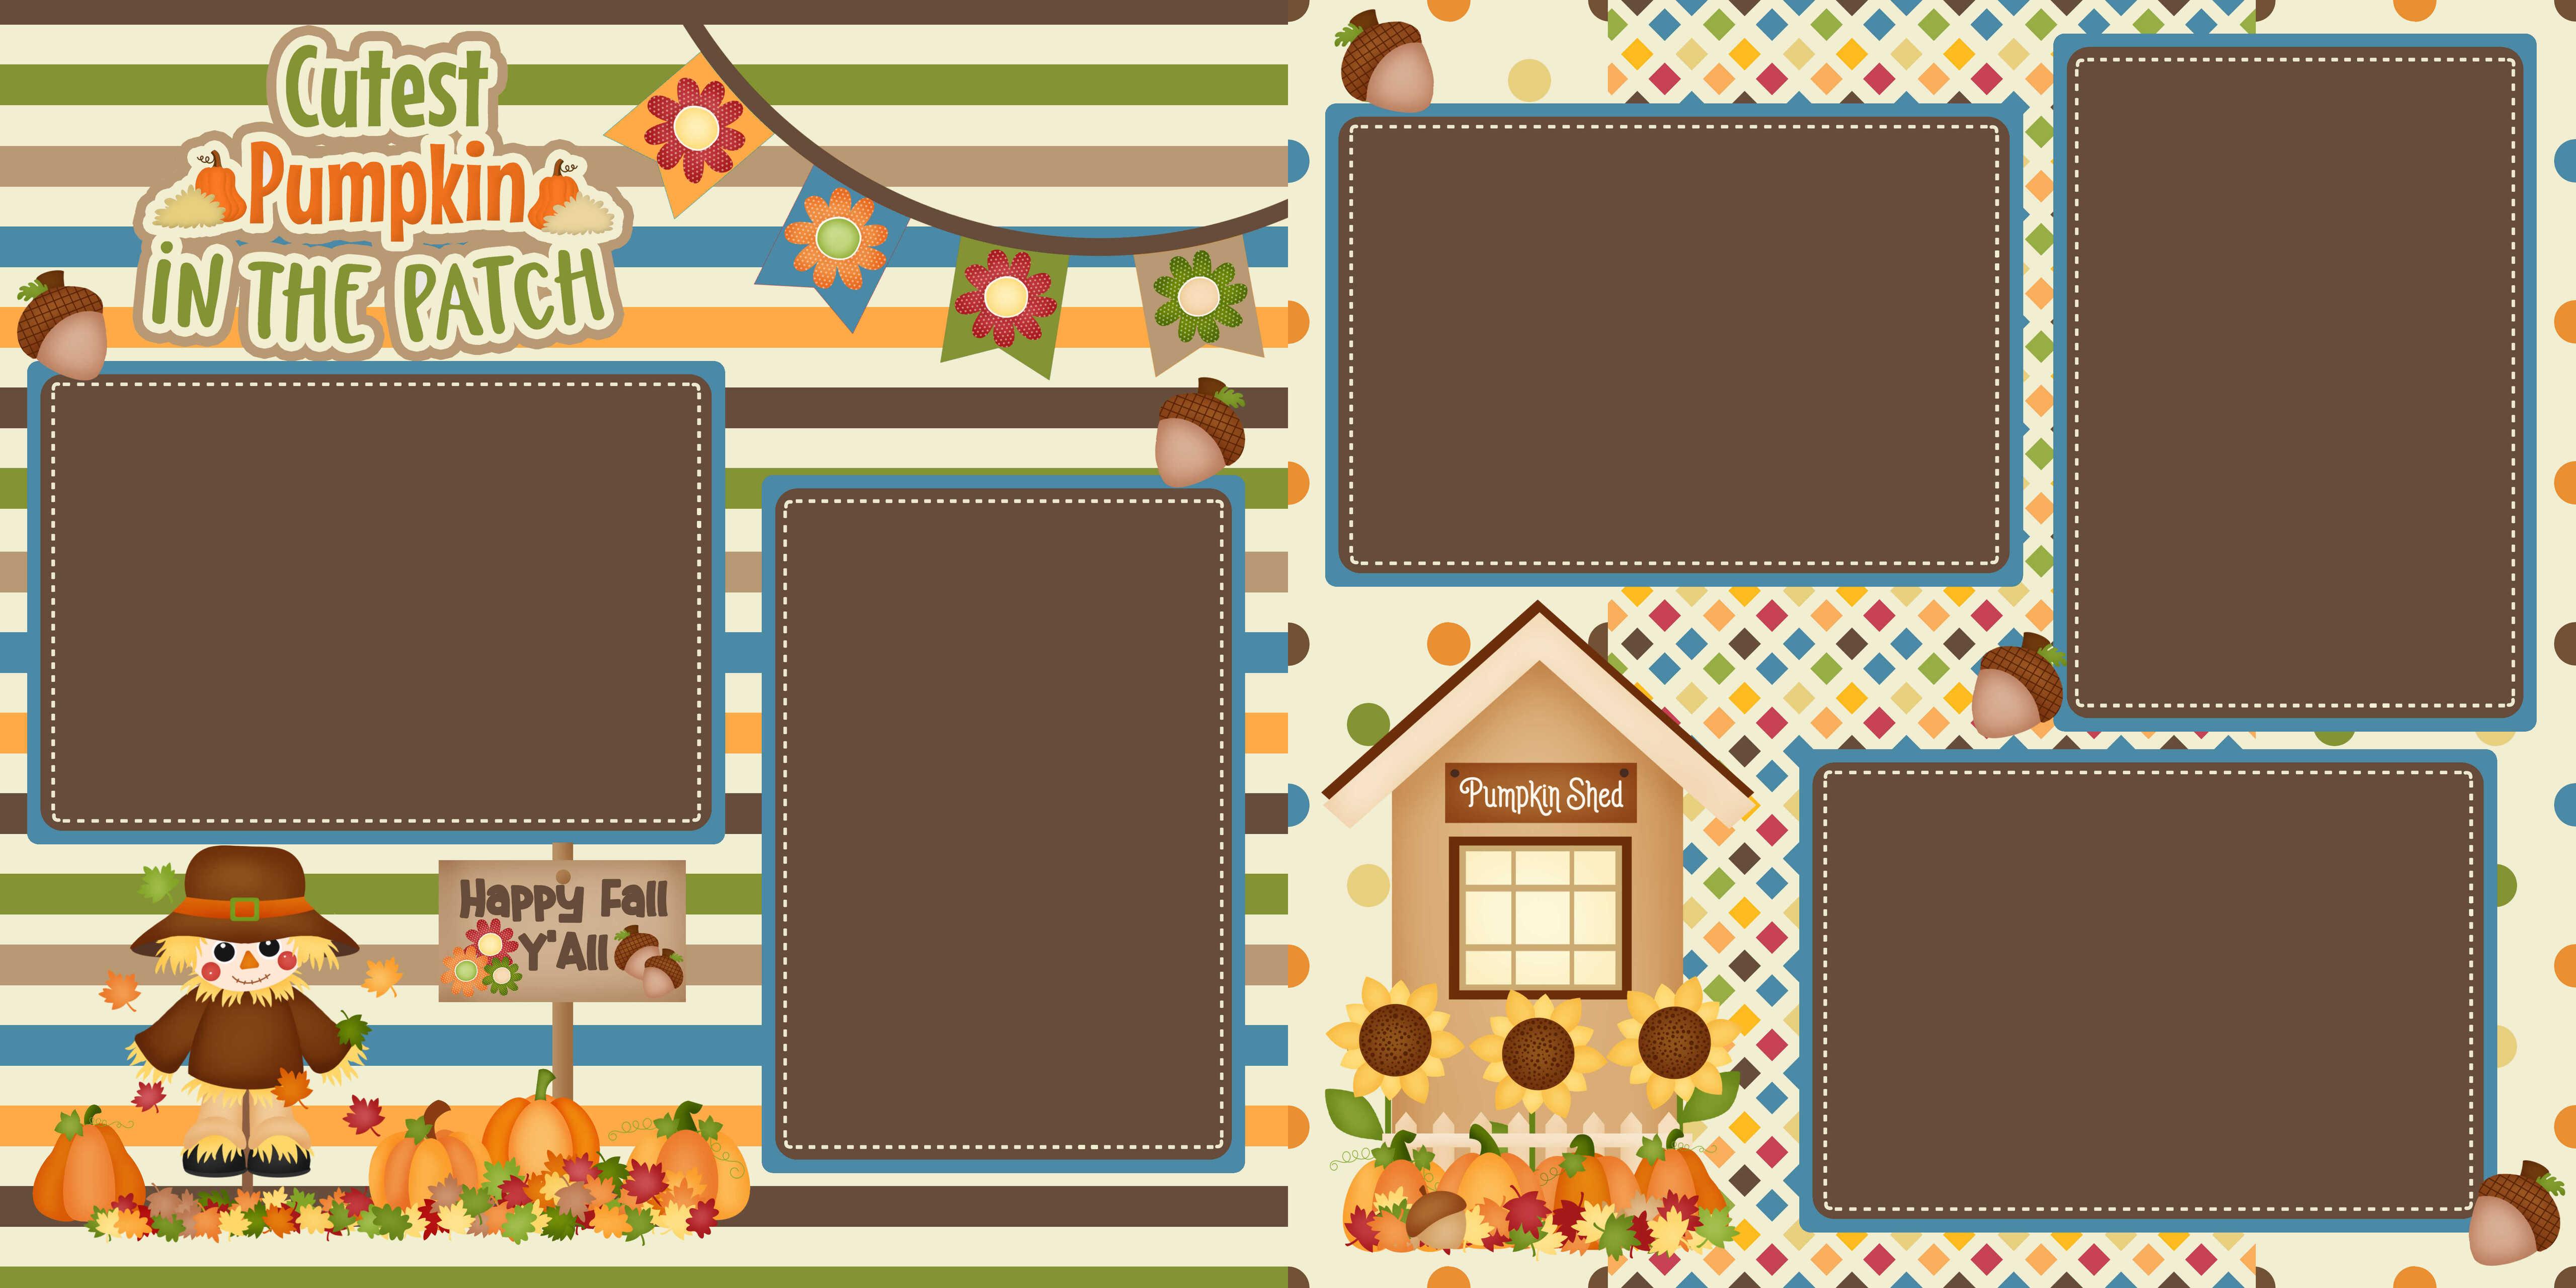 Cutest Pumpkin in the Patch (2) - 12 x 12 Premade, Printed Scrapbook Pages by SSC Designs